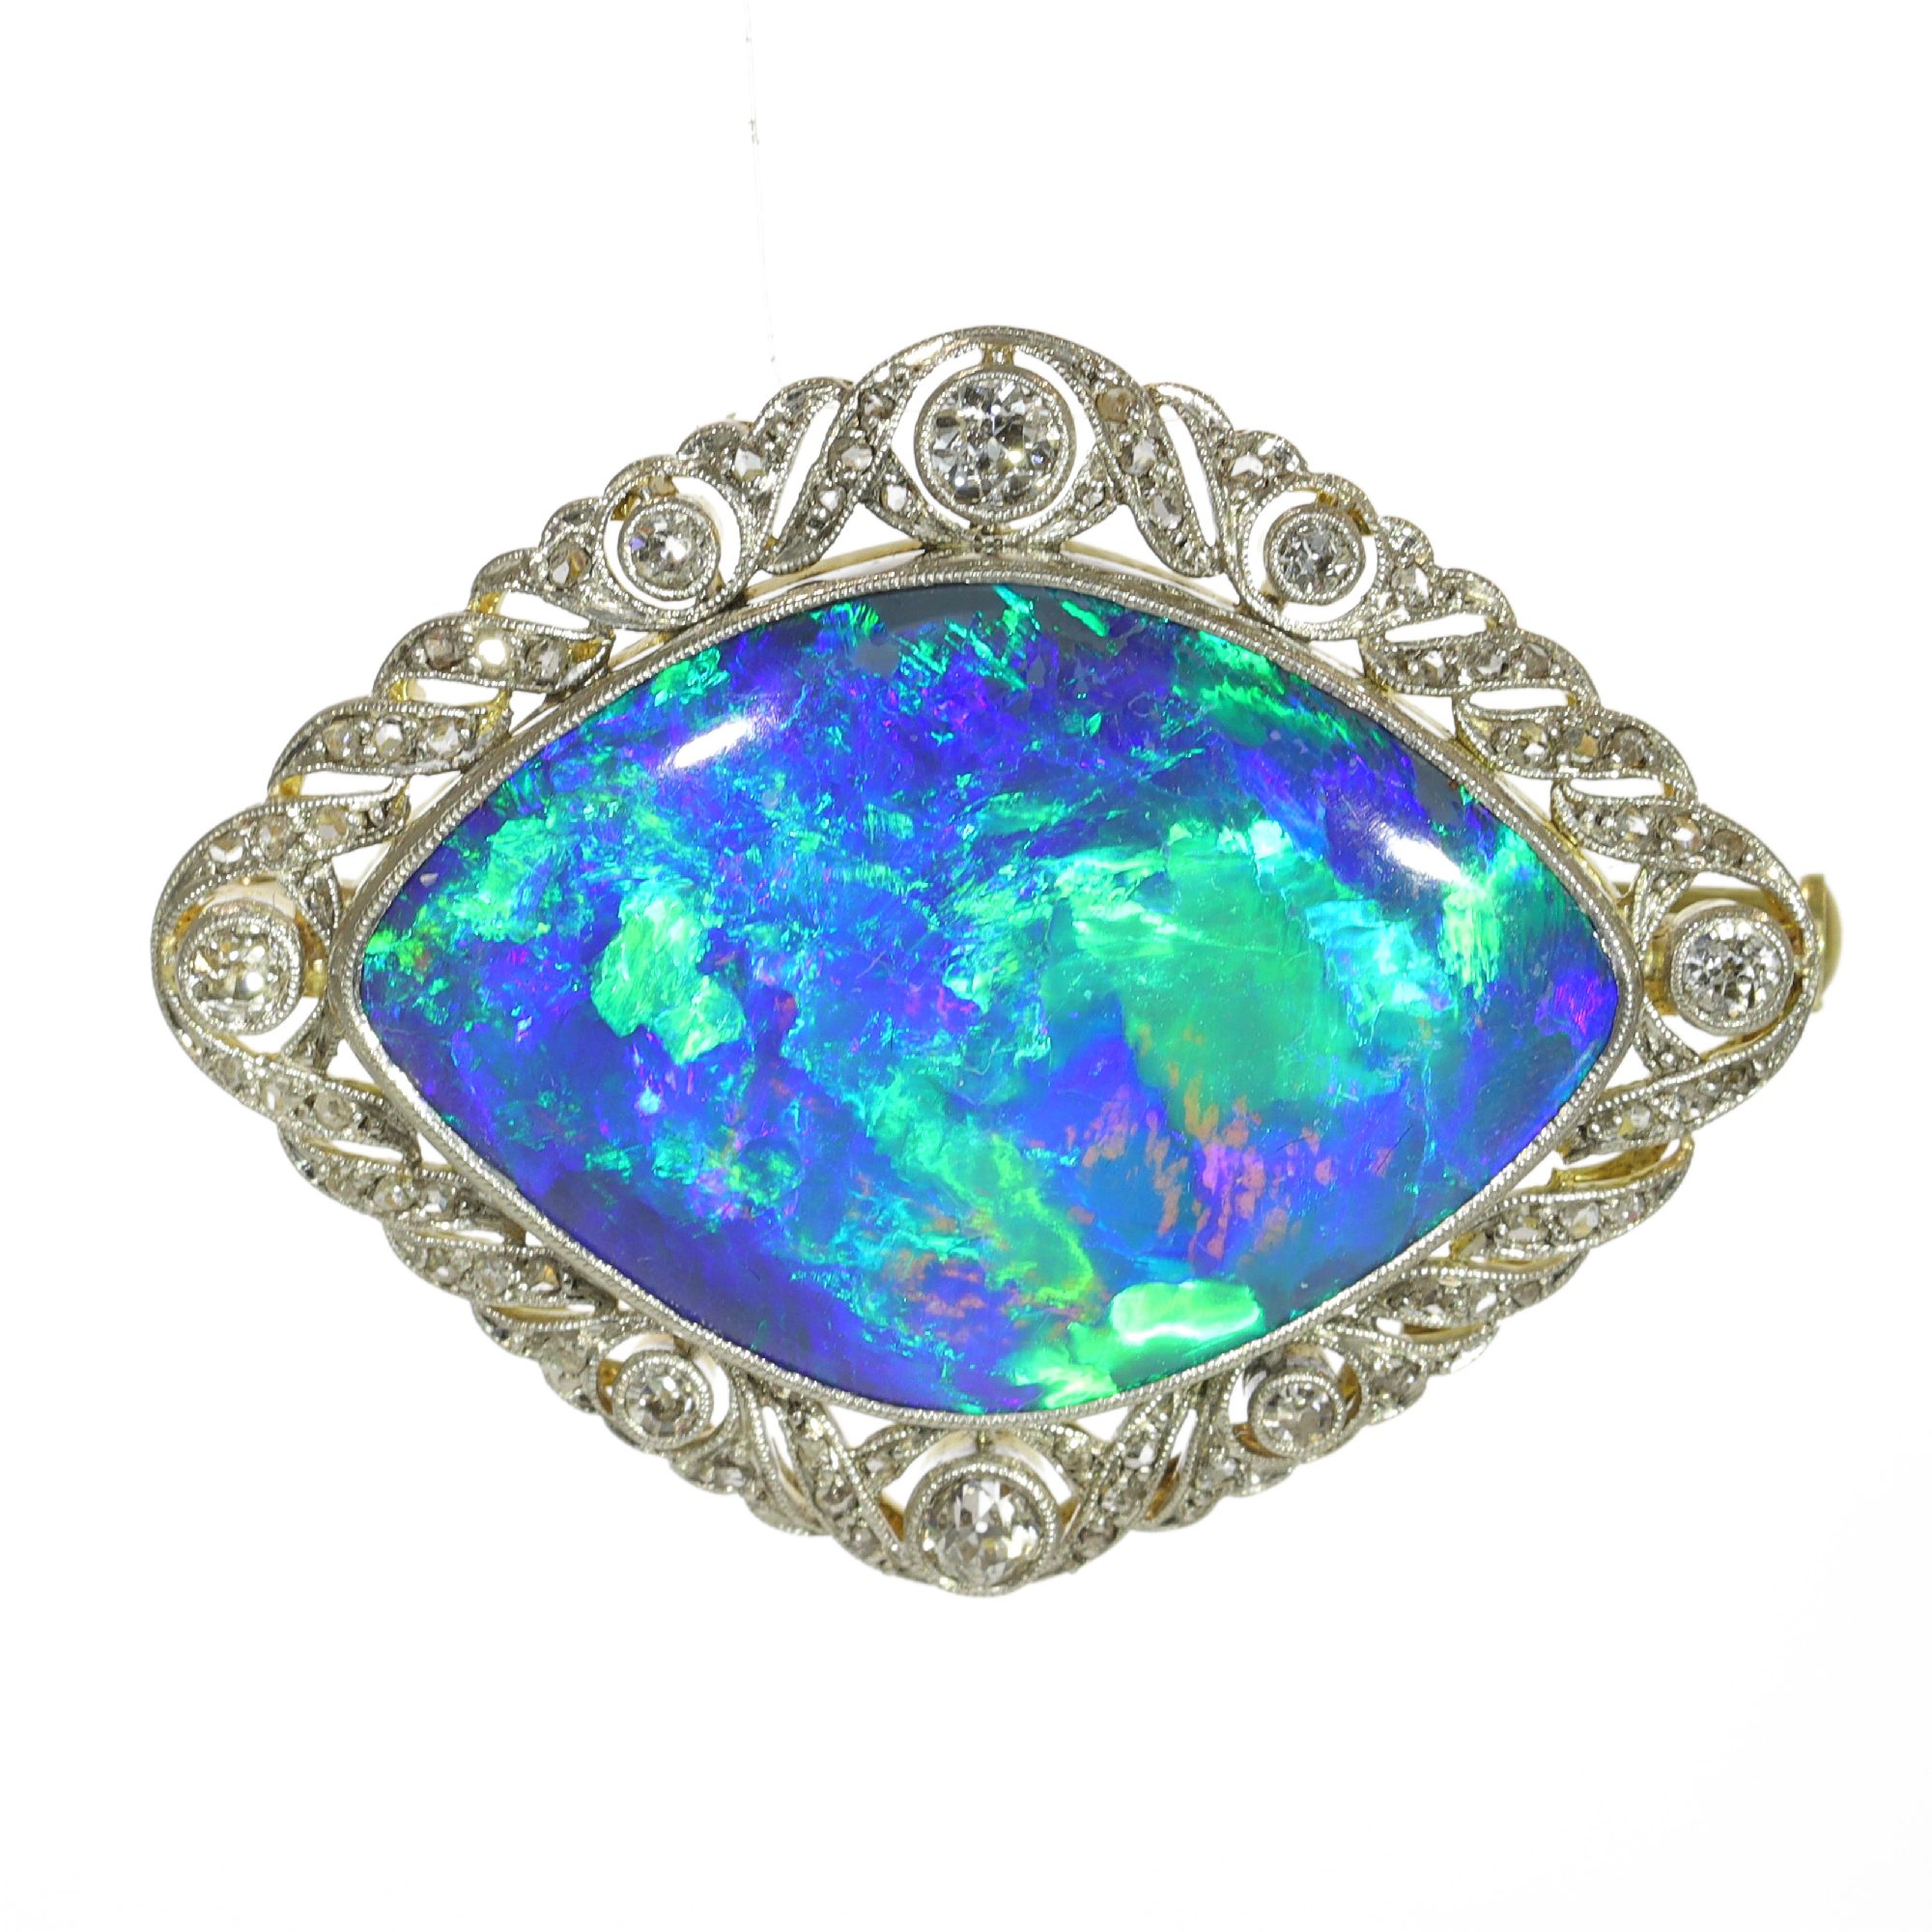 Antique Cosmic Dance: 24ct Black Opal Brooch from 1920